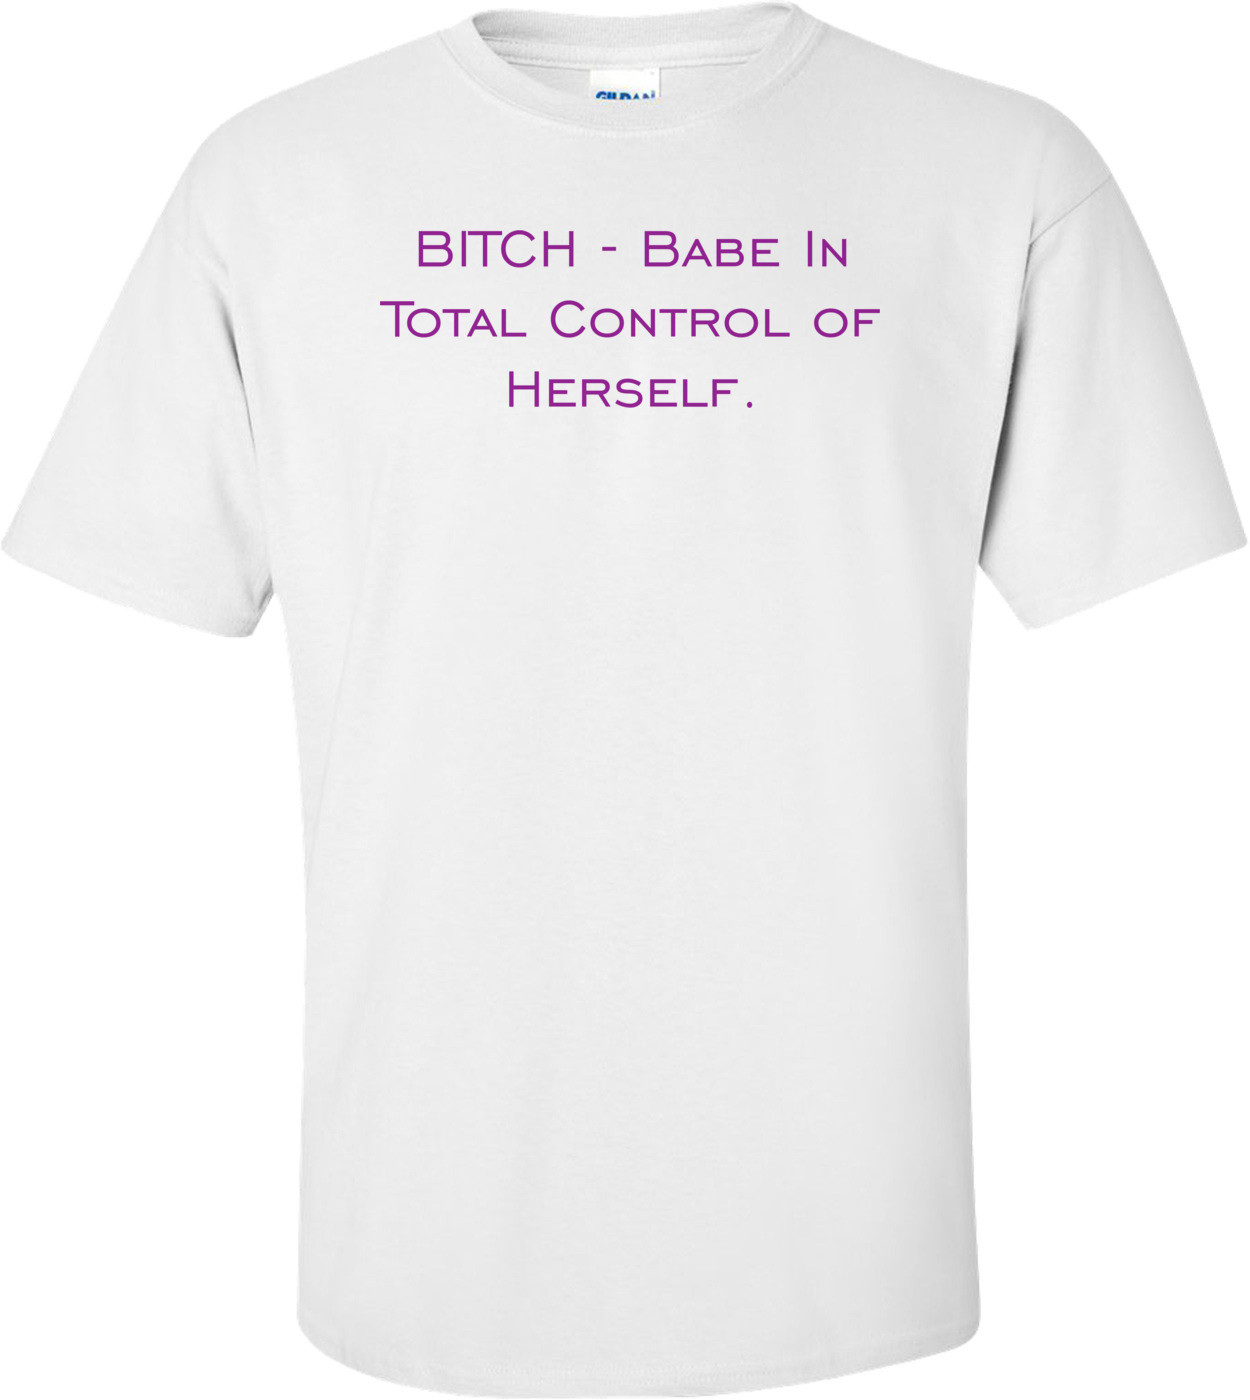 BITCH - Babe In Total Control of Herself.